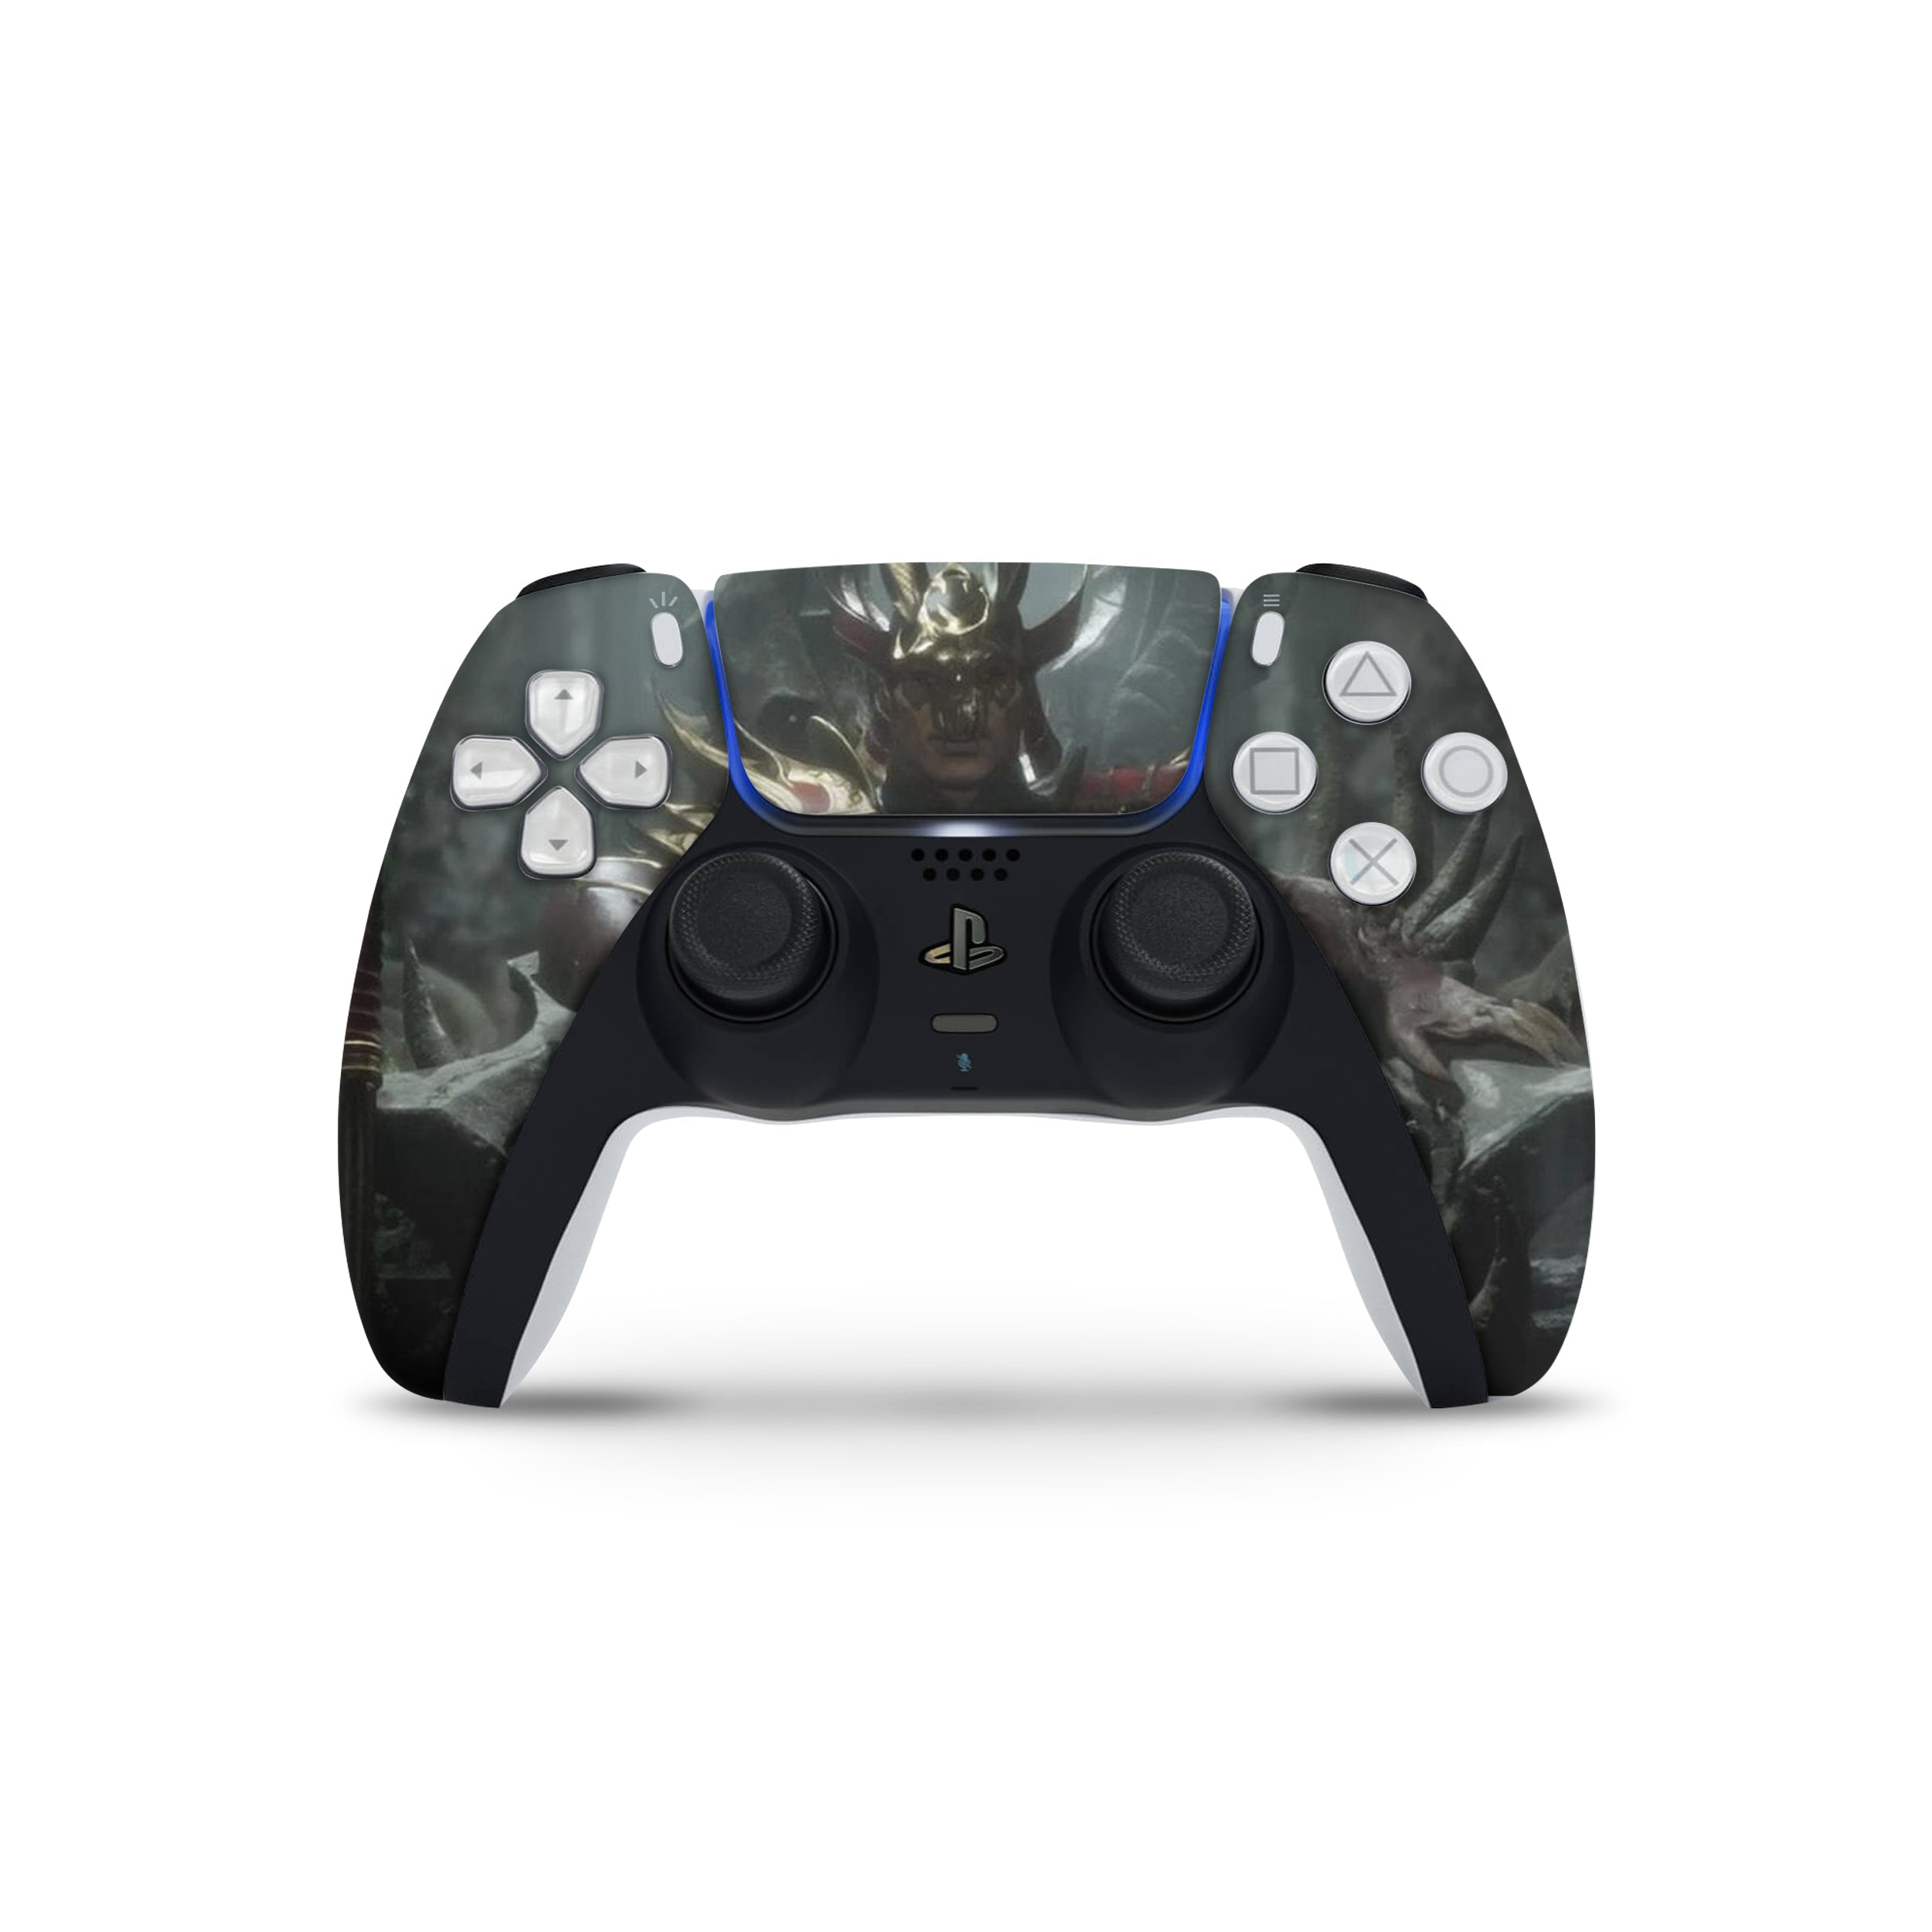 A video game skin featuring a Mortal Kombat 11 Scorpion design for the PS5 DualSense Controller.